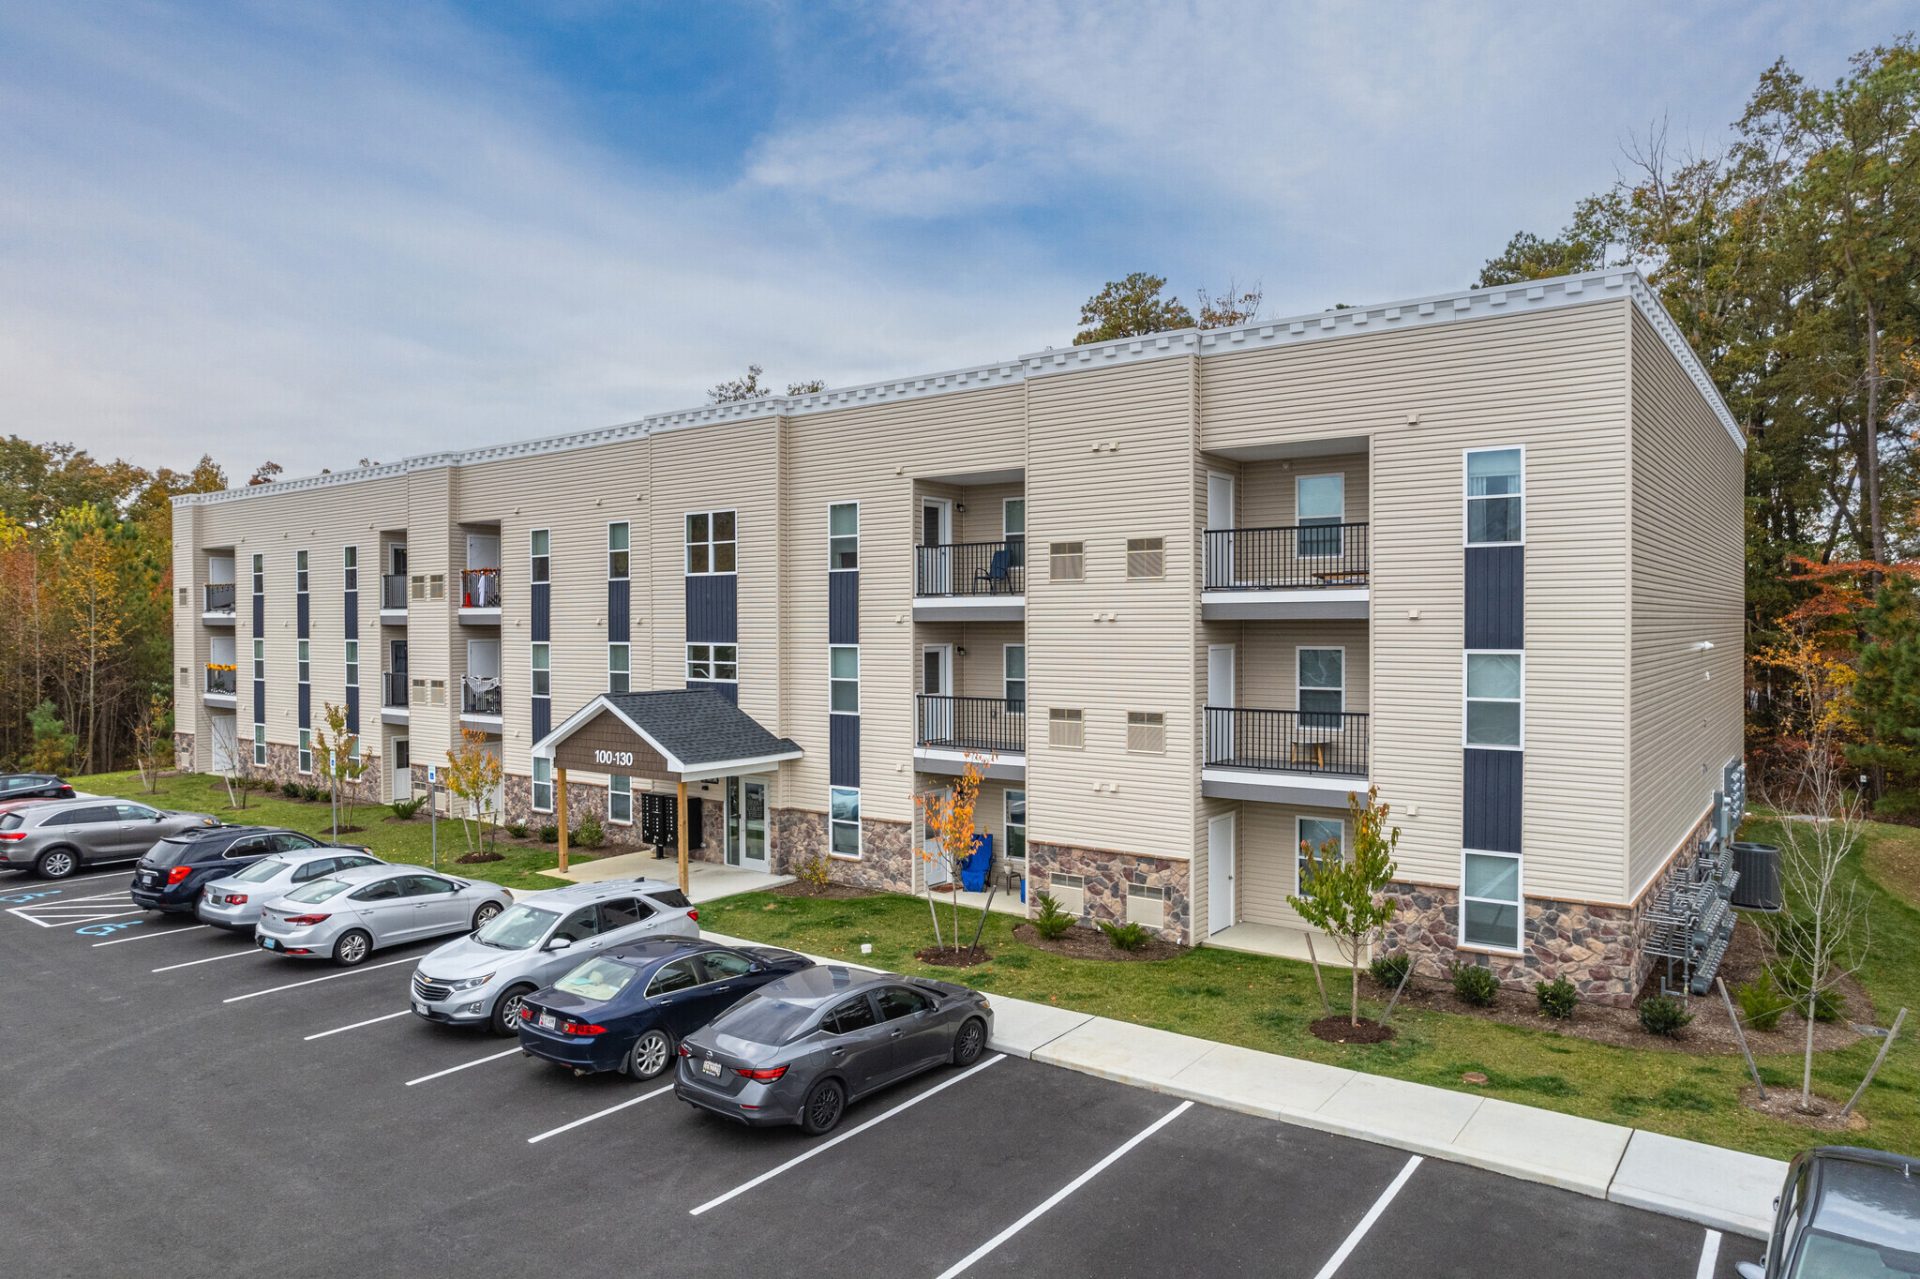 Apartments and Townhomes in Easton Maryland Triple Crown